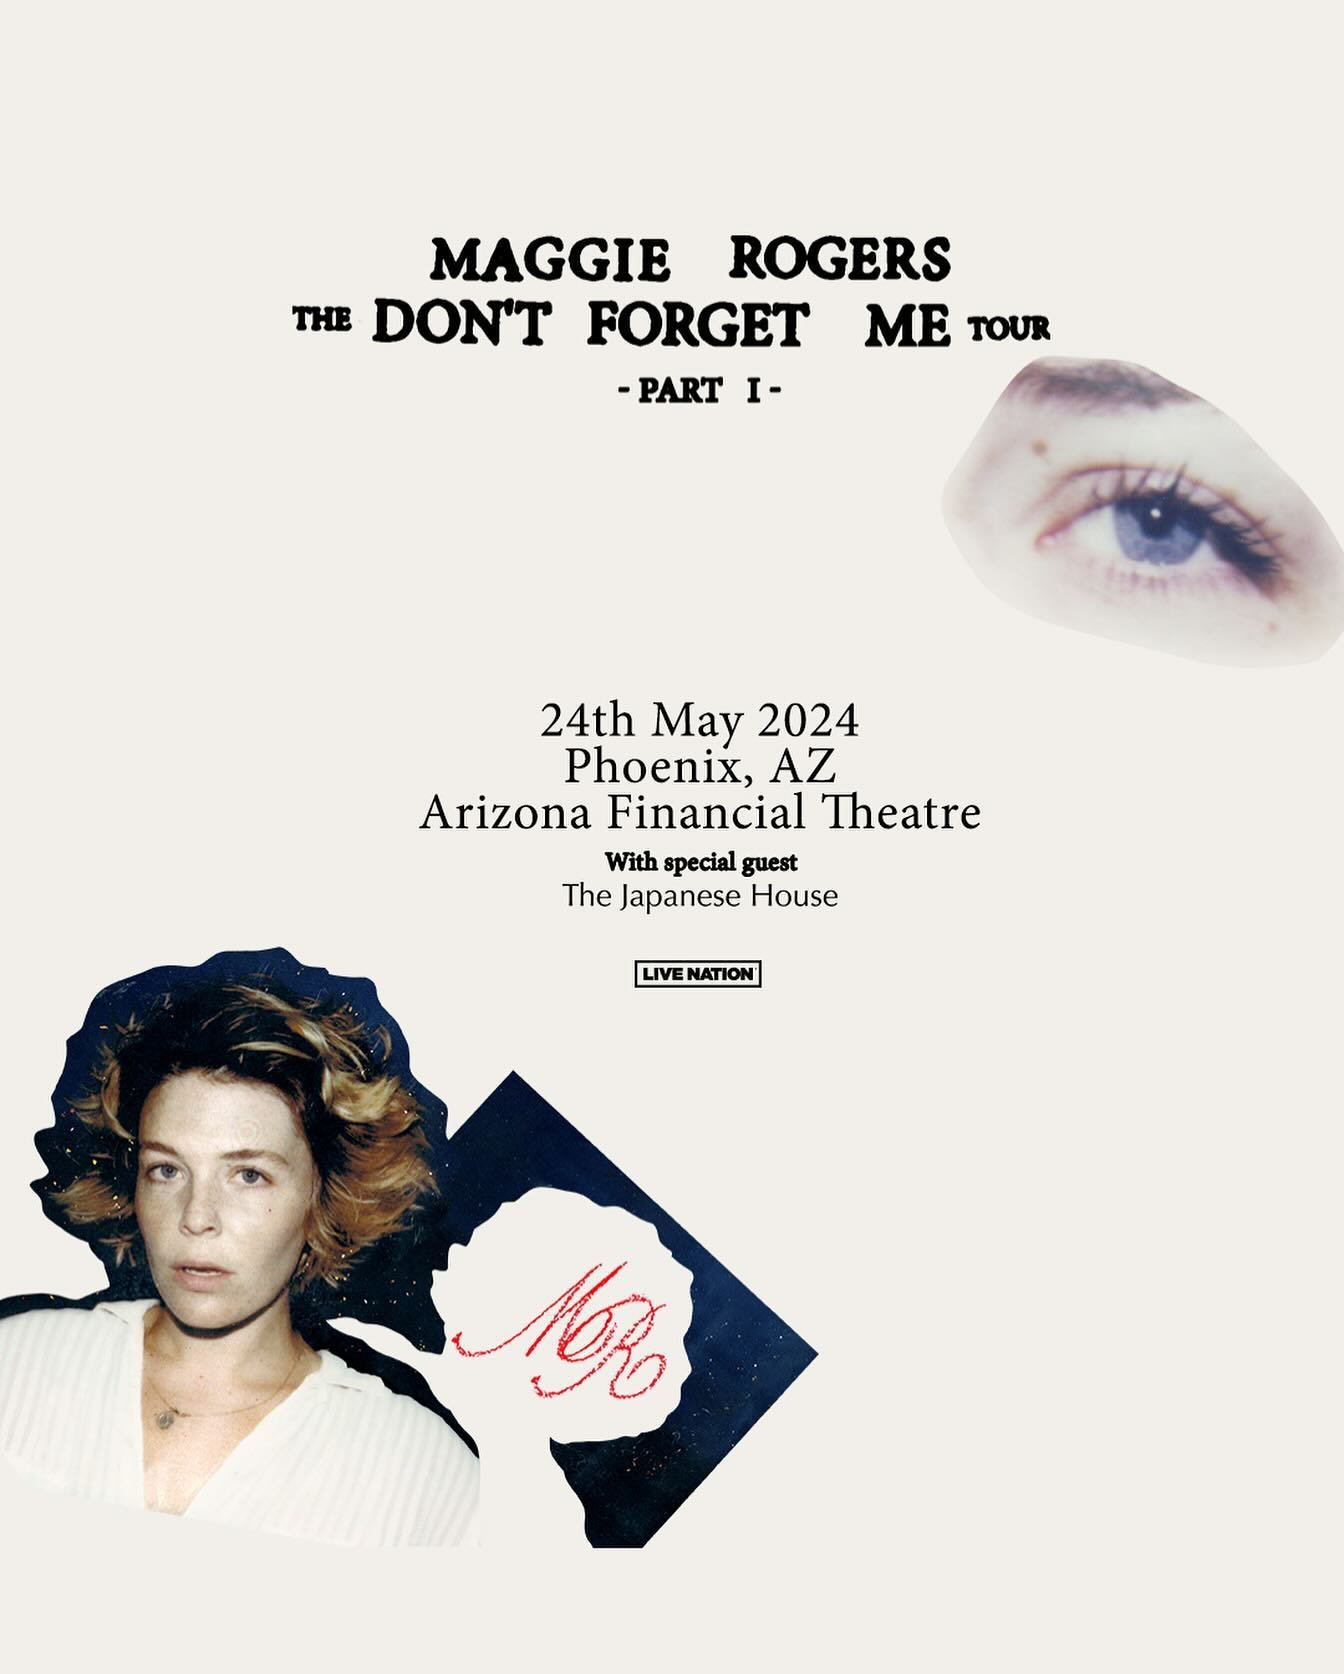 GIVEAWAY! 
Maggie Rogers is coming to Arizona Financial Theatre May 24 on the Don&rsquo;t Forget Me Tour. Enter now to win 2 tickets for you and a friend to attend!
Maggie Rogers
 with The Japanese House
To enter:
1. Follow @livenationphx, @lighthear